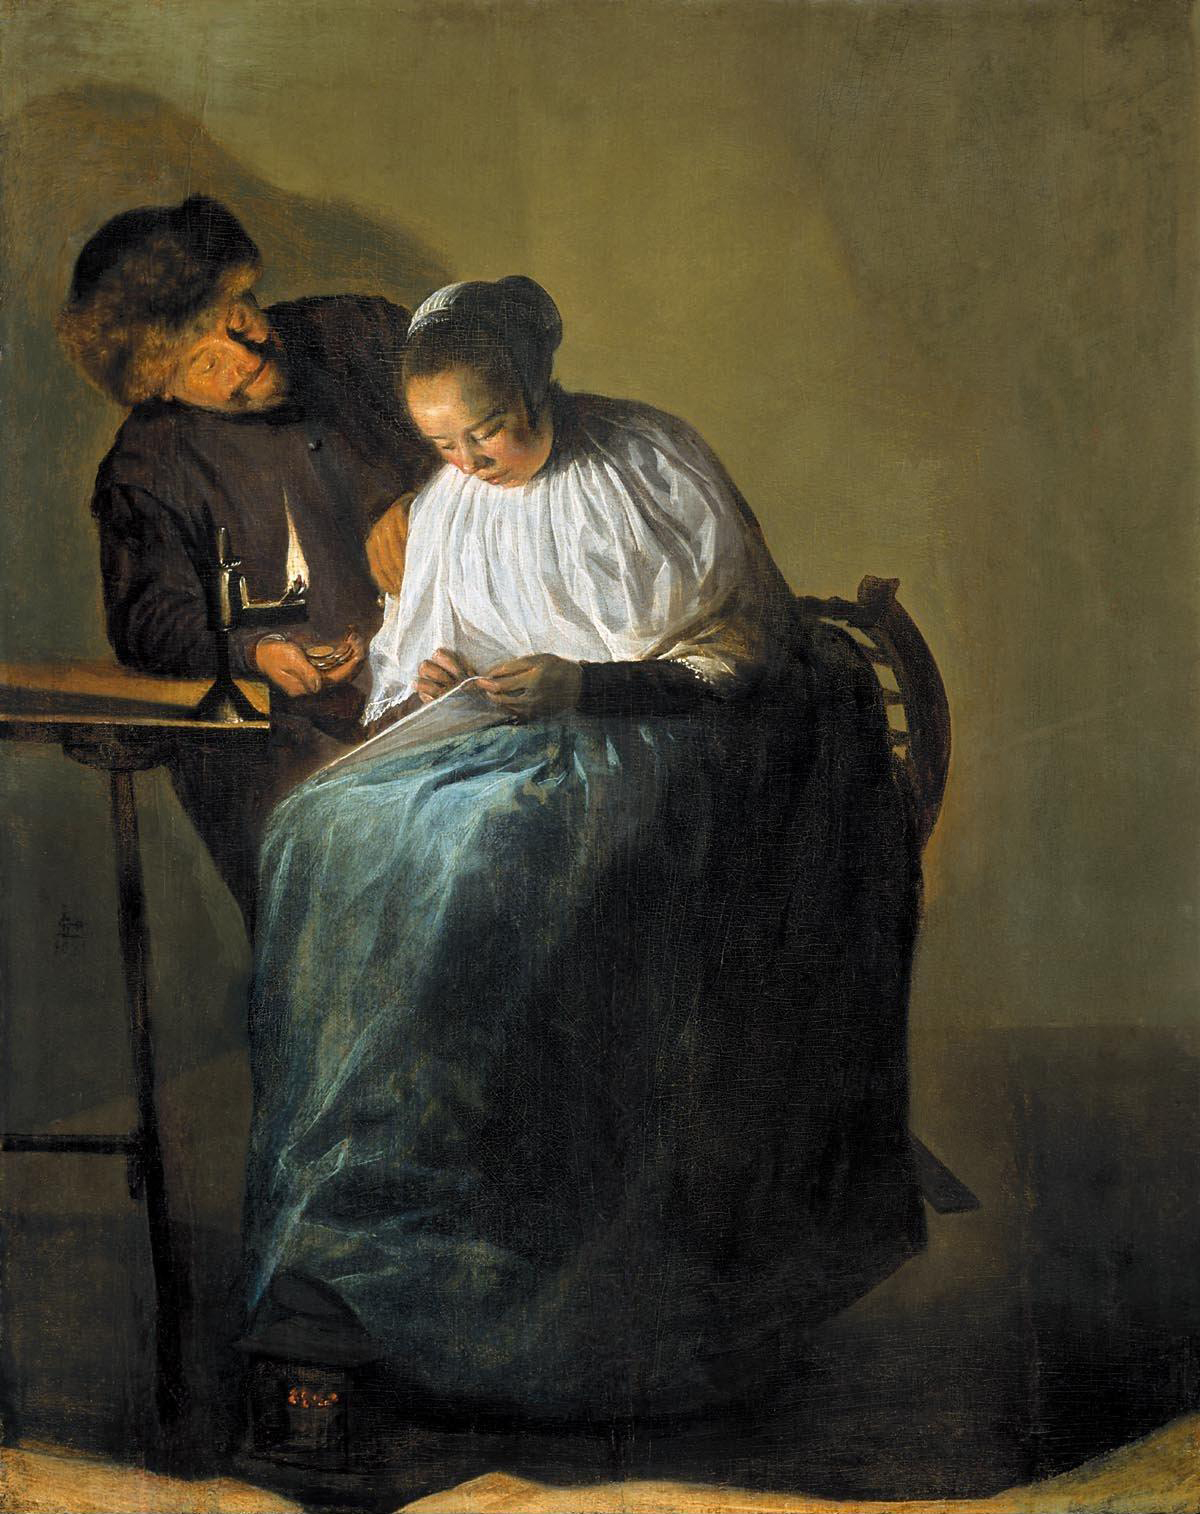 Judith Leyster, The Proposition. 1631